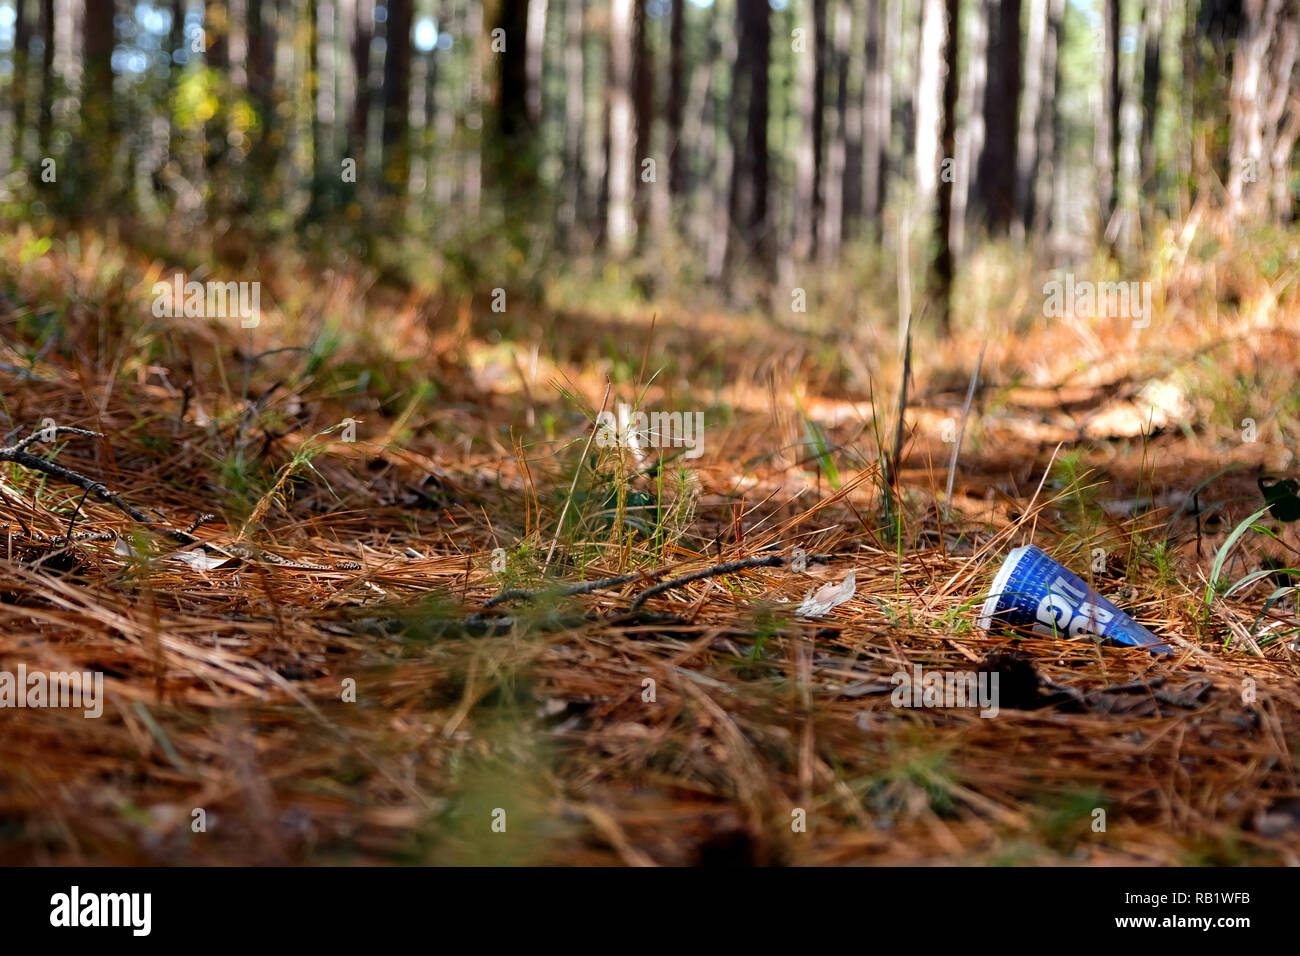 Empty beer can thrown on the ground amid pine needles at the Sam Houston National Forest in Texas; aluminum pollution; trash in nature. Stock Photo